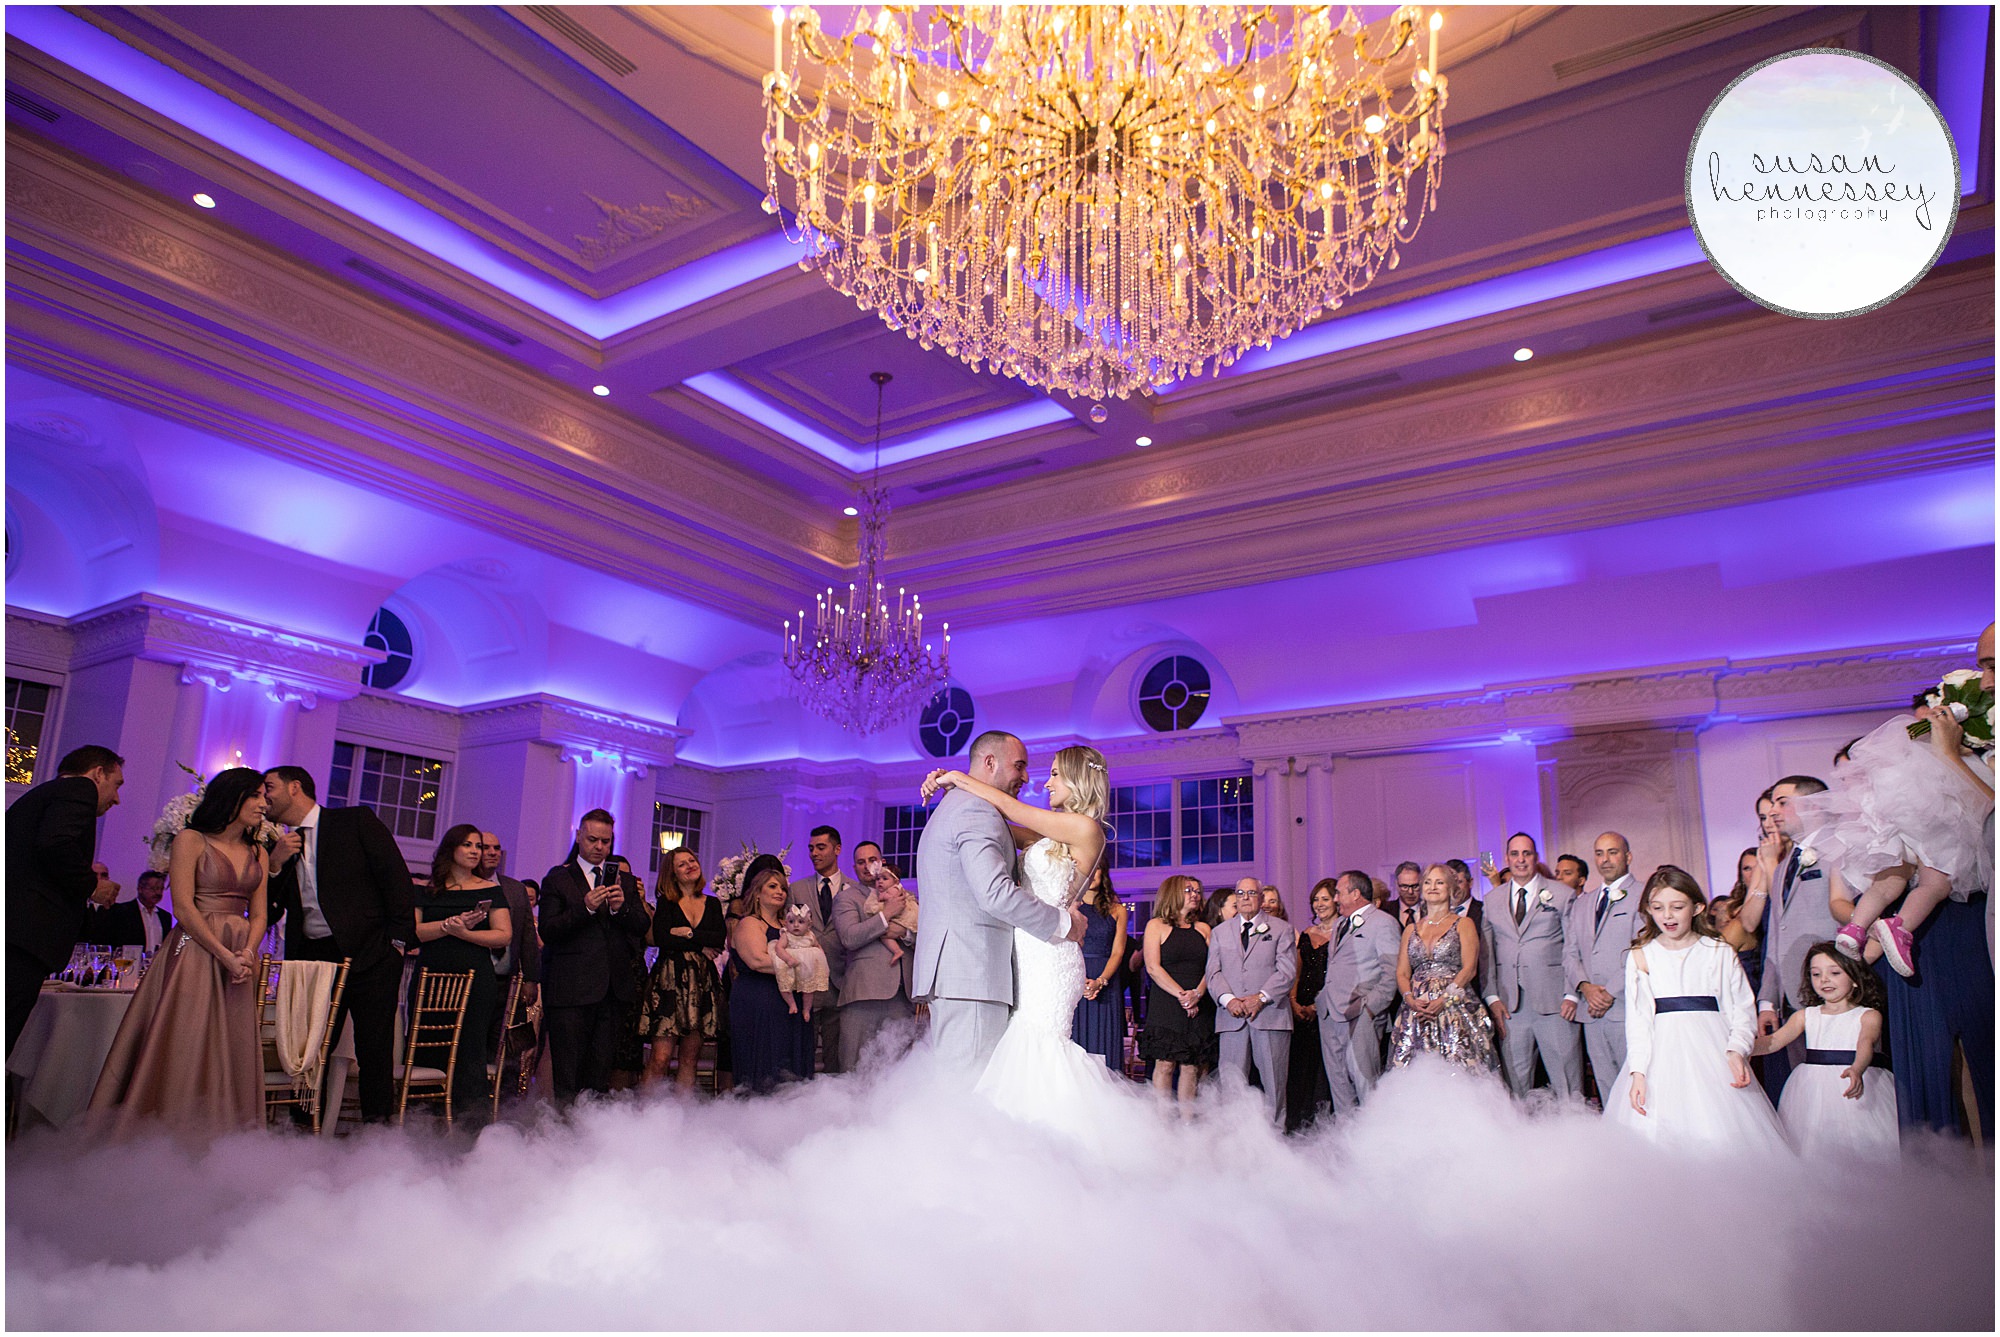 First dance in the clouds at Park Chateau